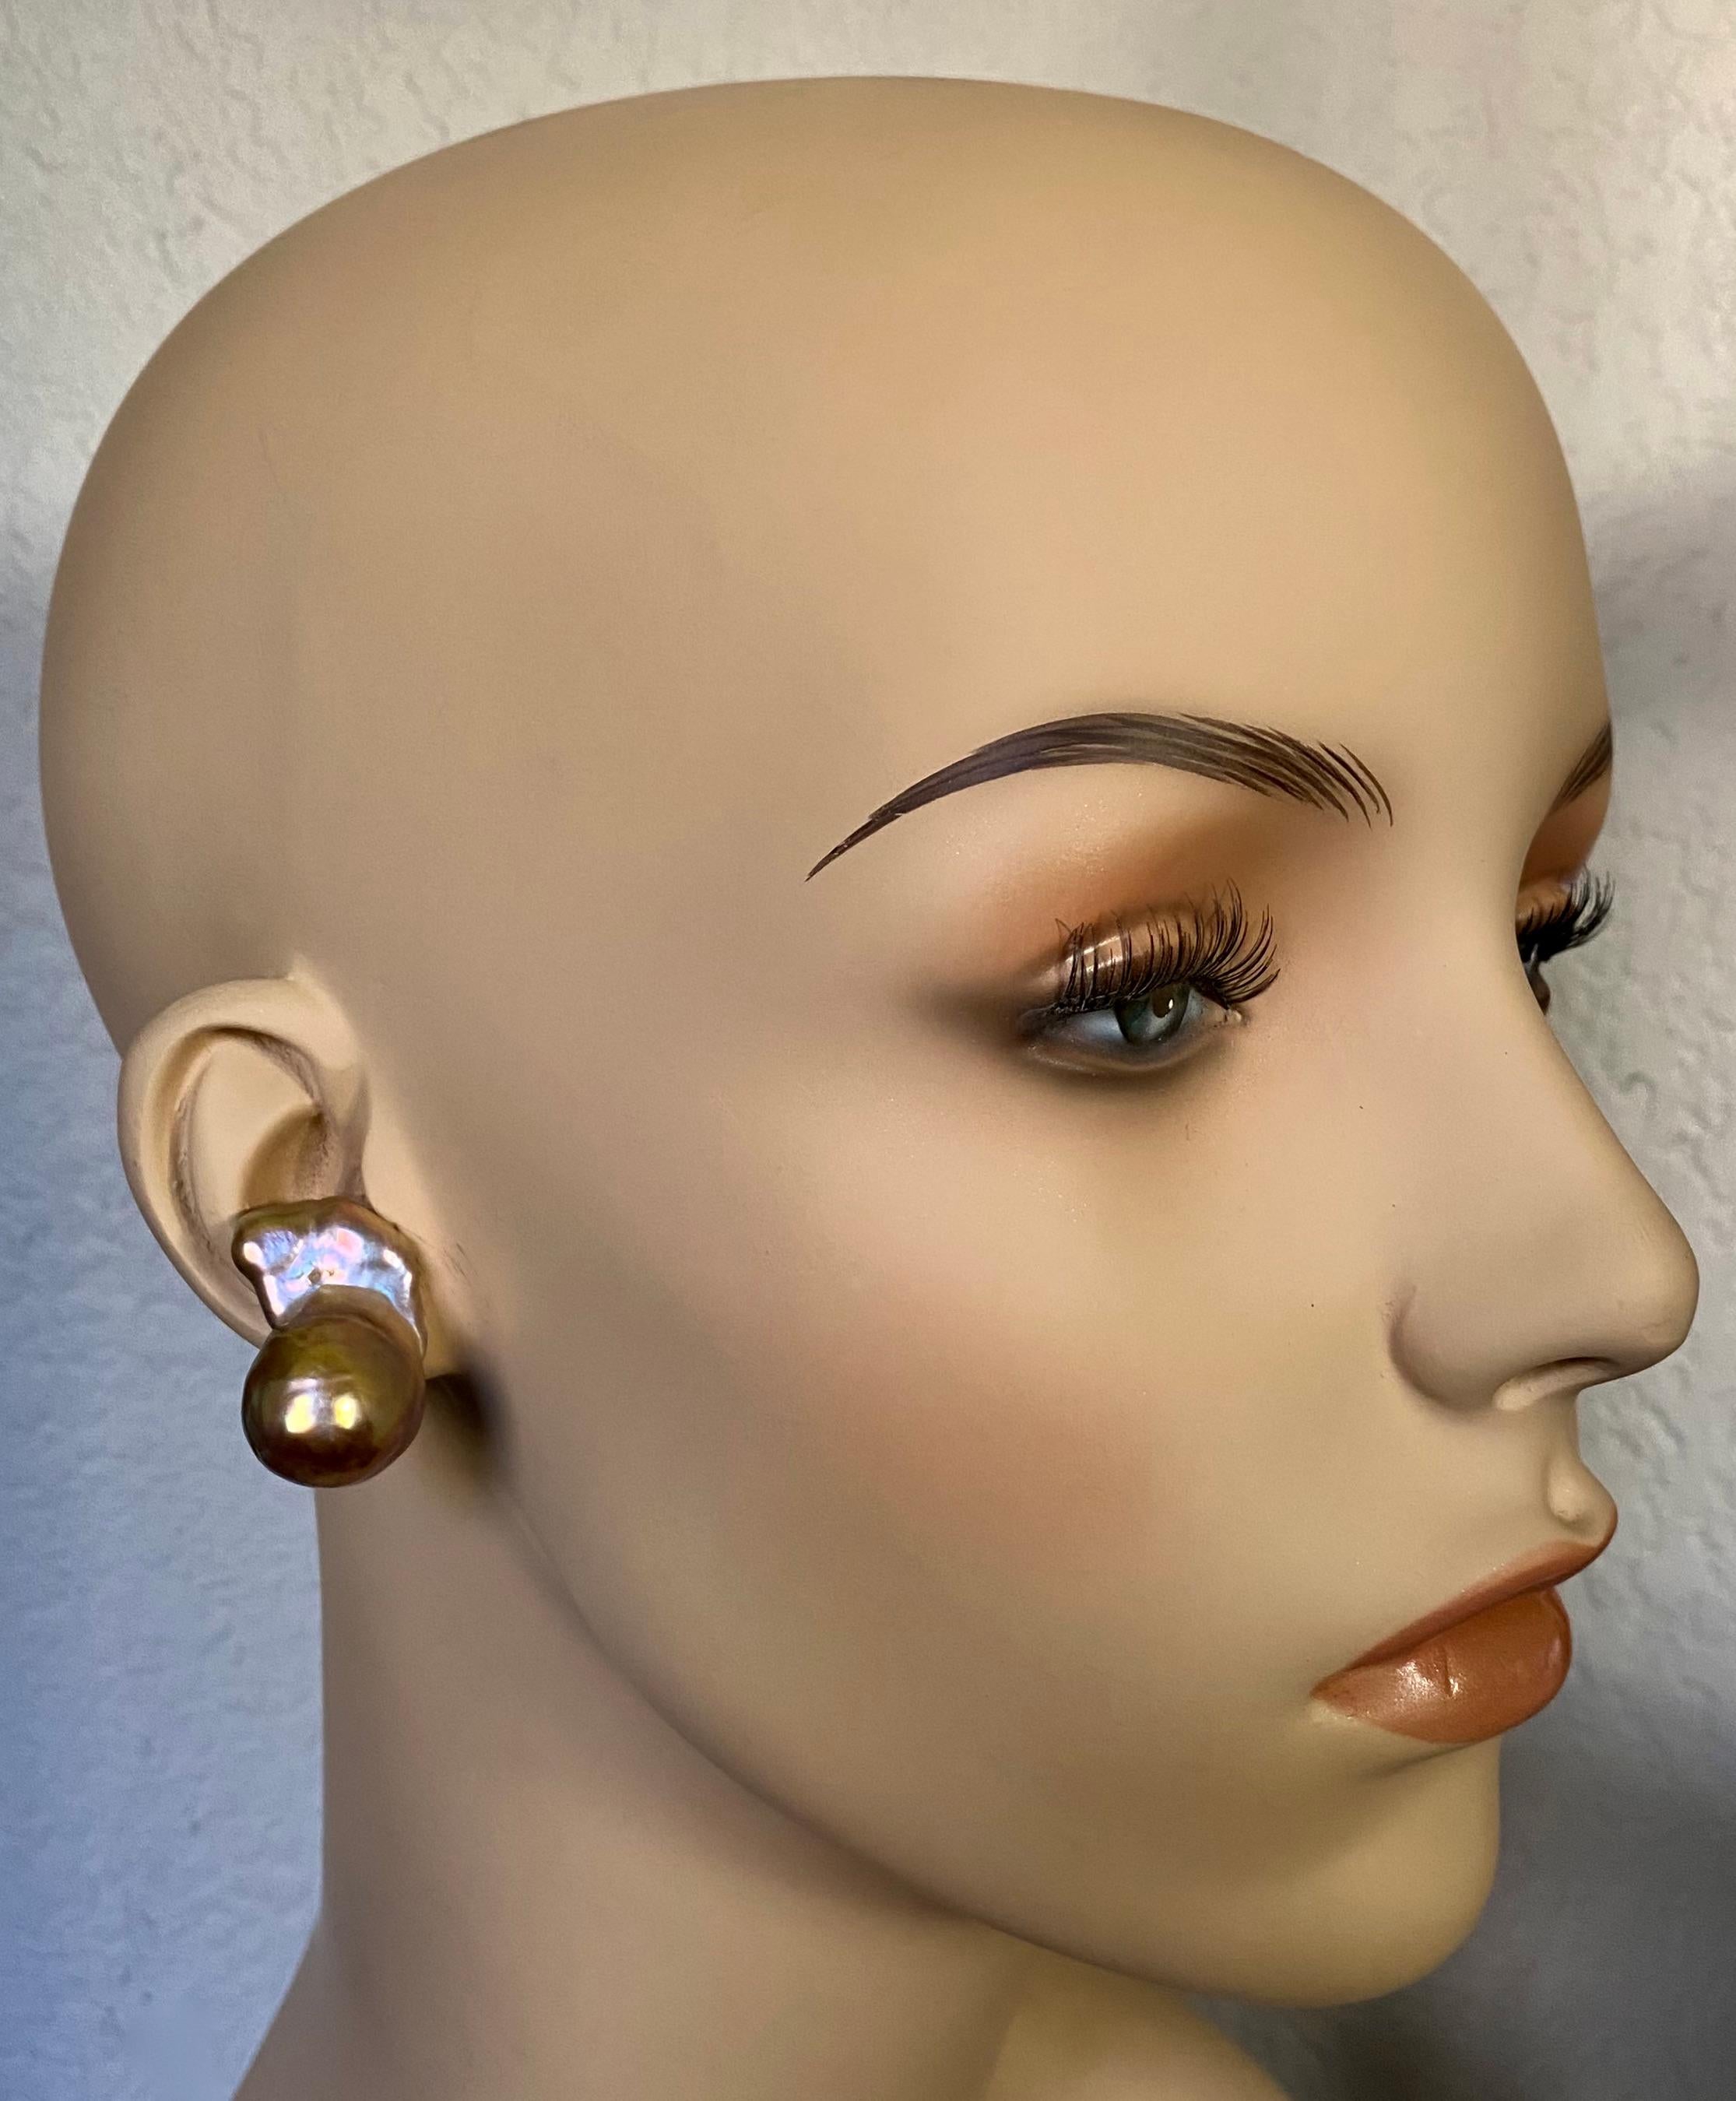 Baroque pearls are showcased in these dramatic button earrings.  The pearls are among the largest on the market today.  The pearls have a pink foundation and possess a metallic luster that reflects a full range of colors.  The fluid shape of the